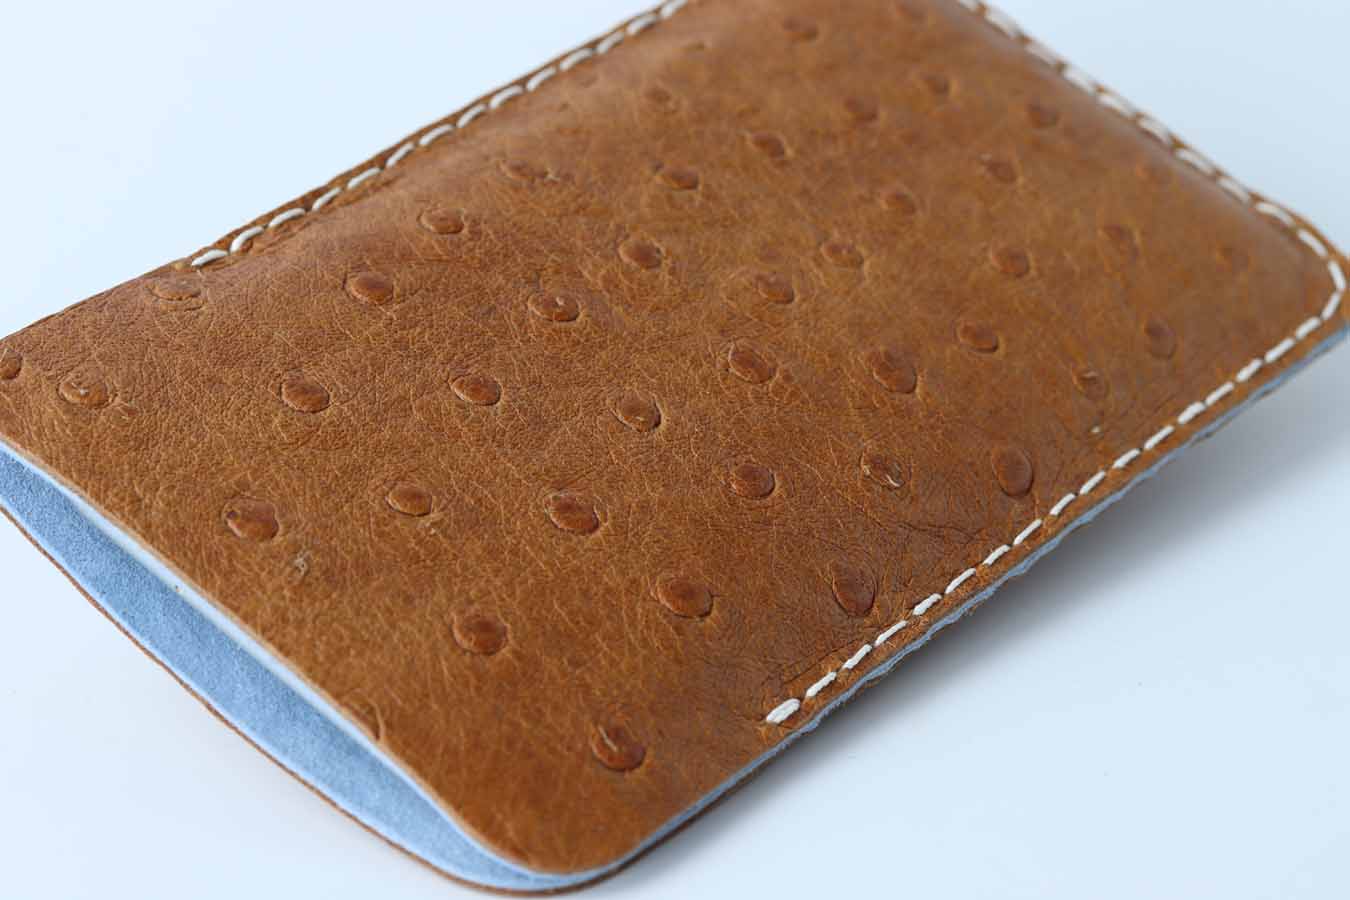 iPhone ostrich leather sleeve / pouch / case